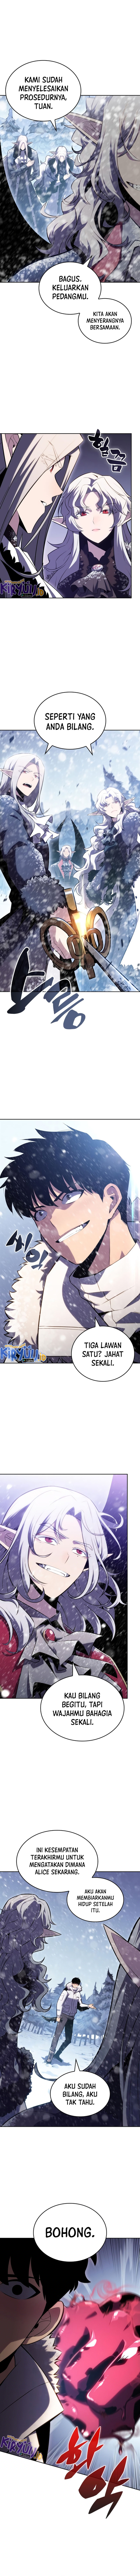 Solo Max-Level Newbie Chapter 91 8